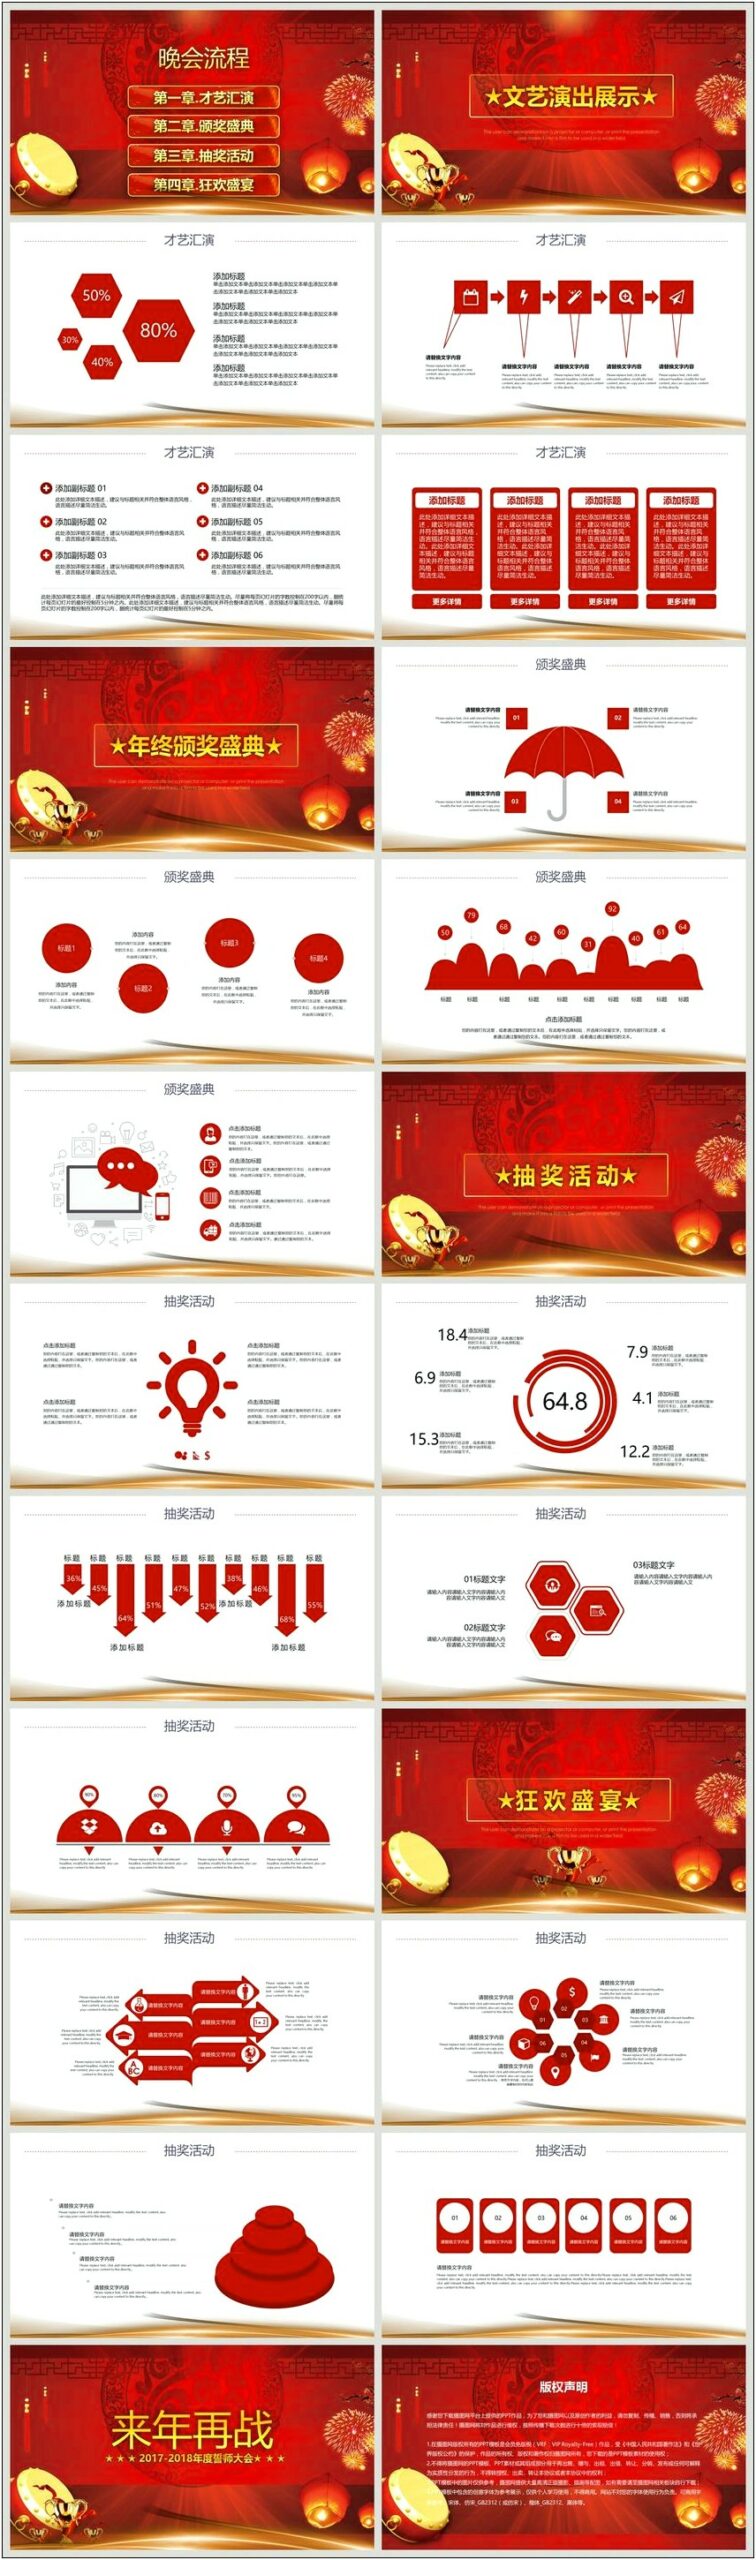 Award Powerpoint Design Templates Free Download